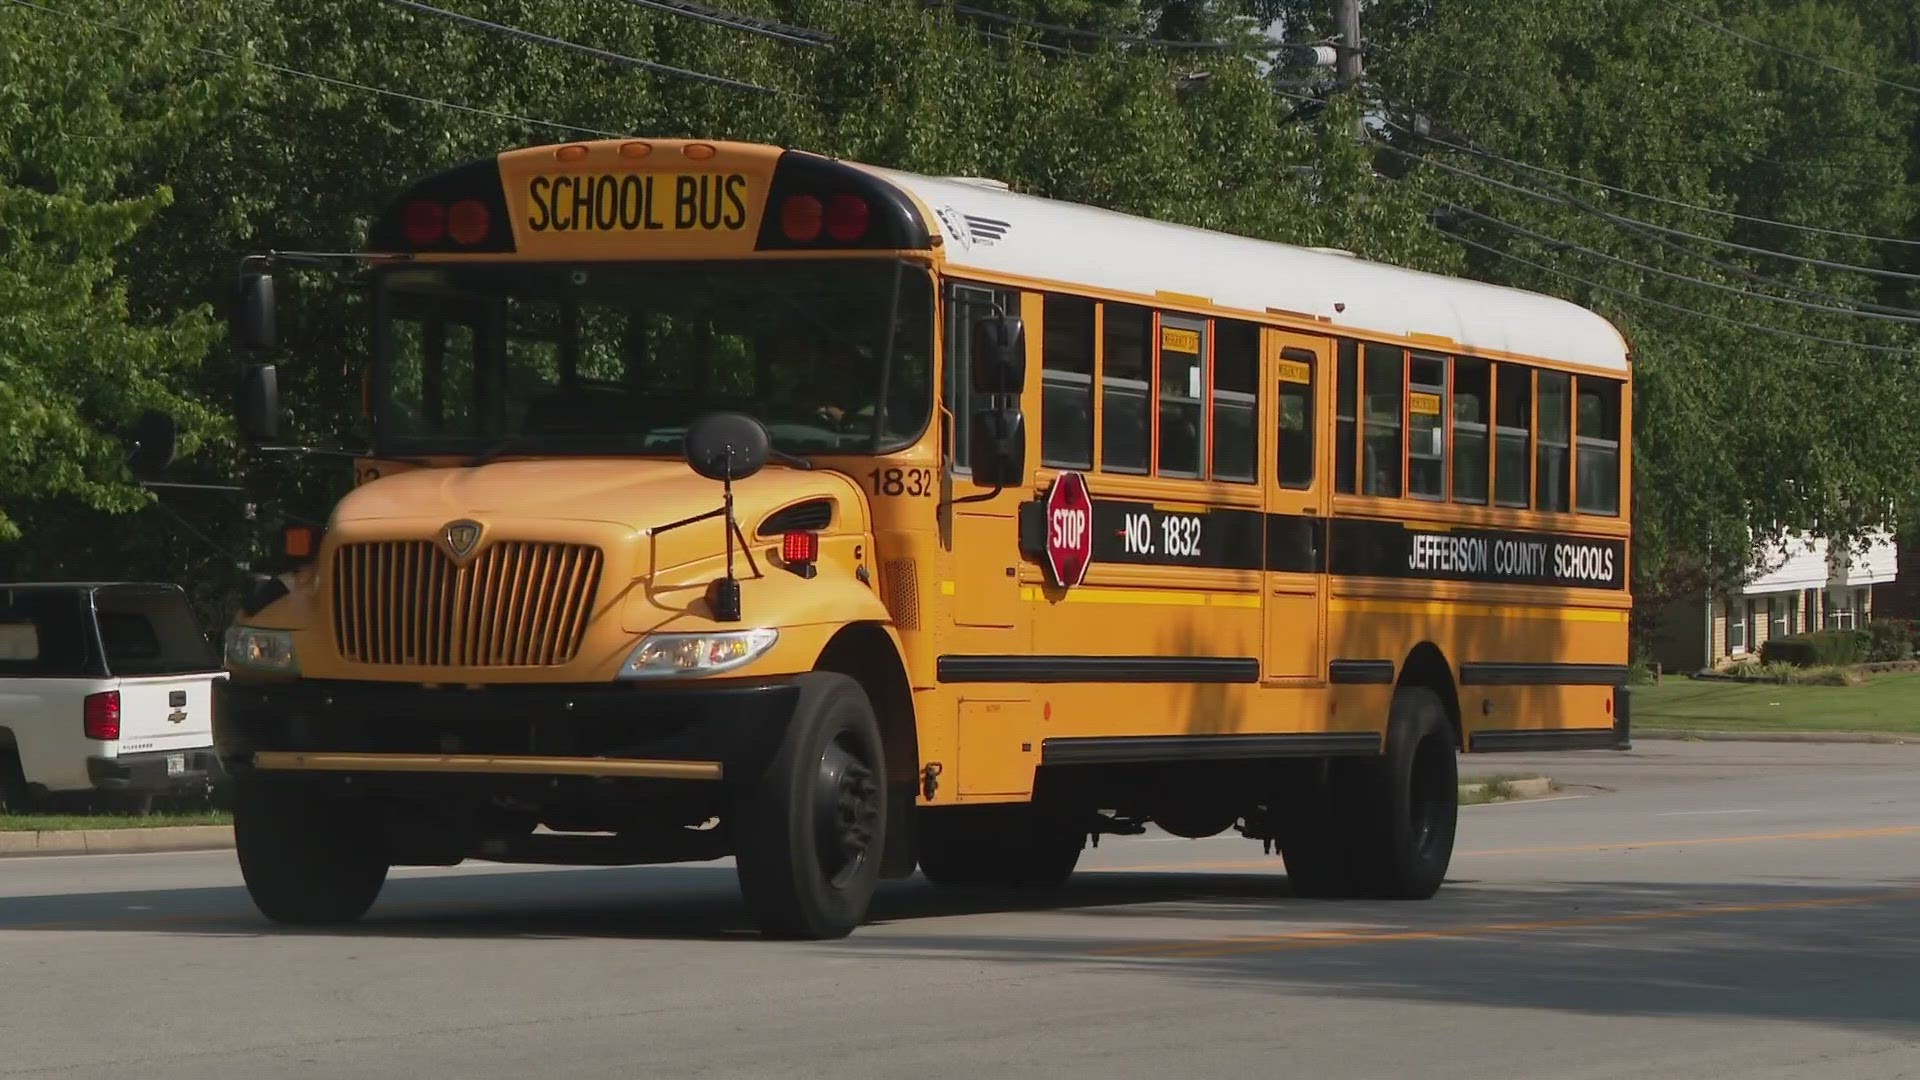 JCPS Superintendent Marty Pollio has hinted at the possibility of making major changes to bus system.